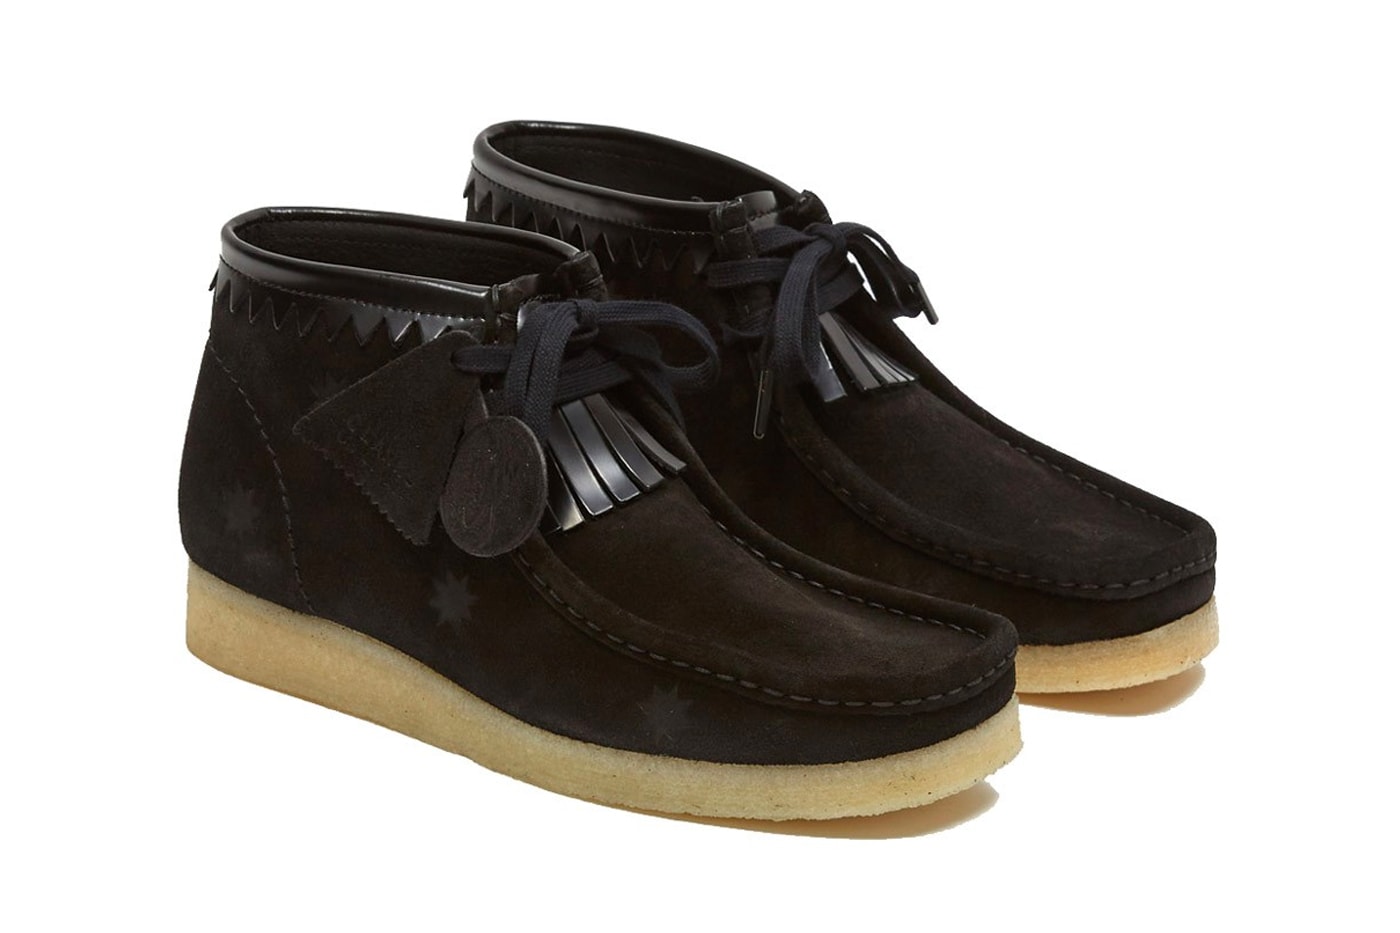 Goodhood and Clarks Originals Craft a Lustrous Black Suede Boot